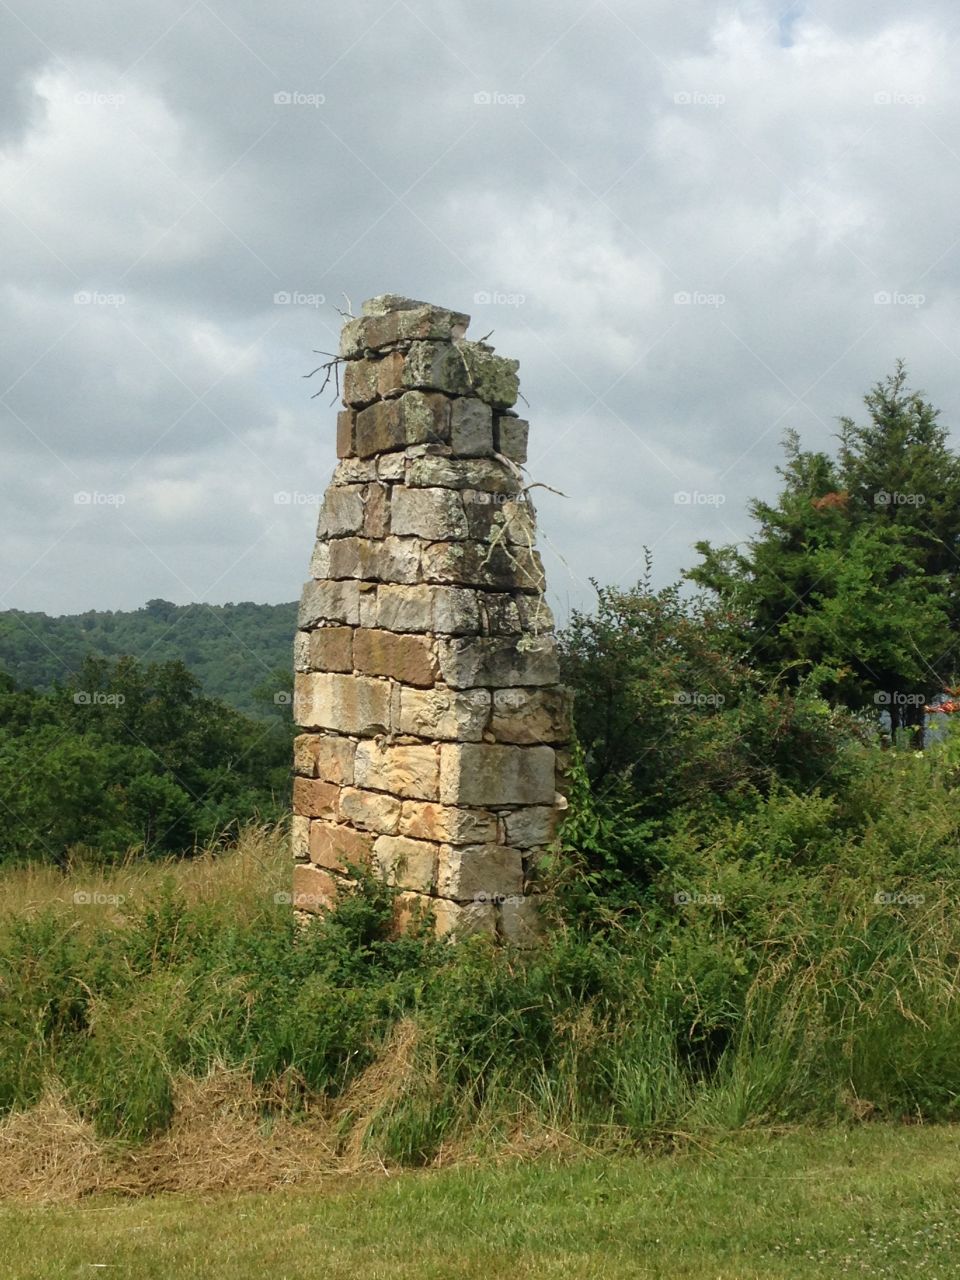 Old Chimney. My grandmothers home place only thing left is chimney. 